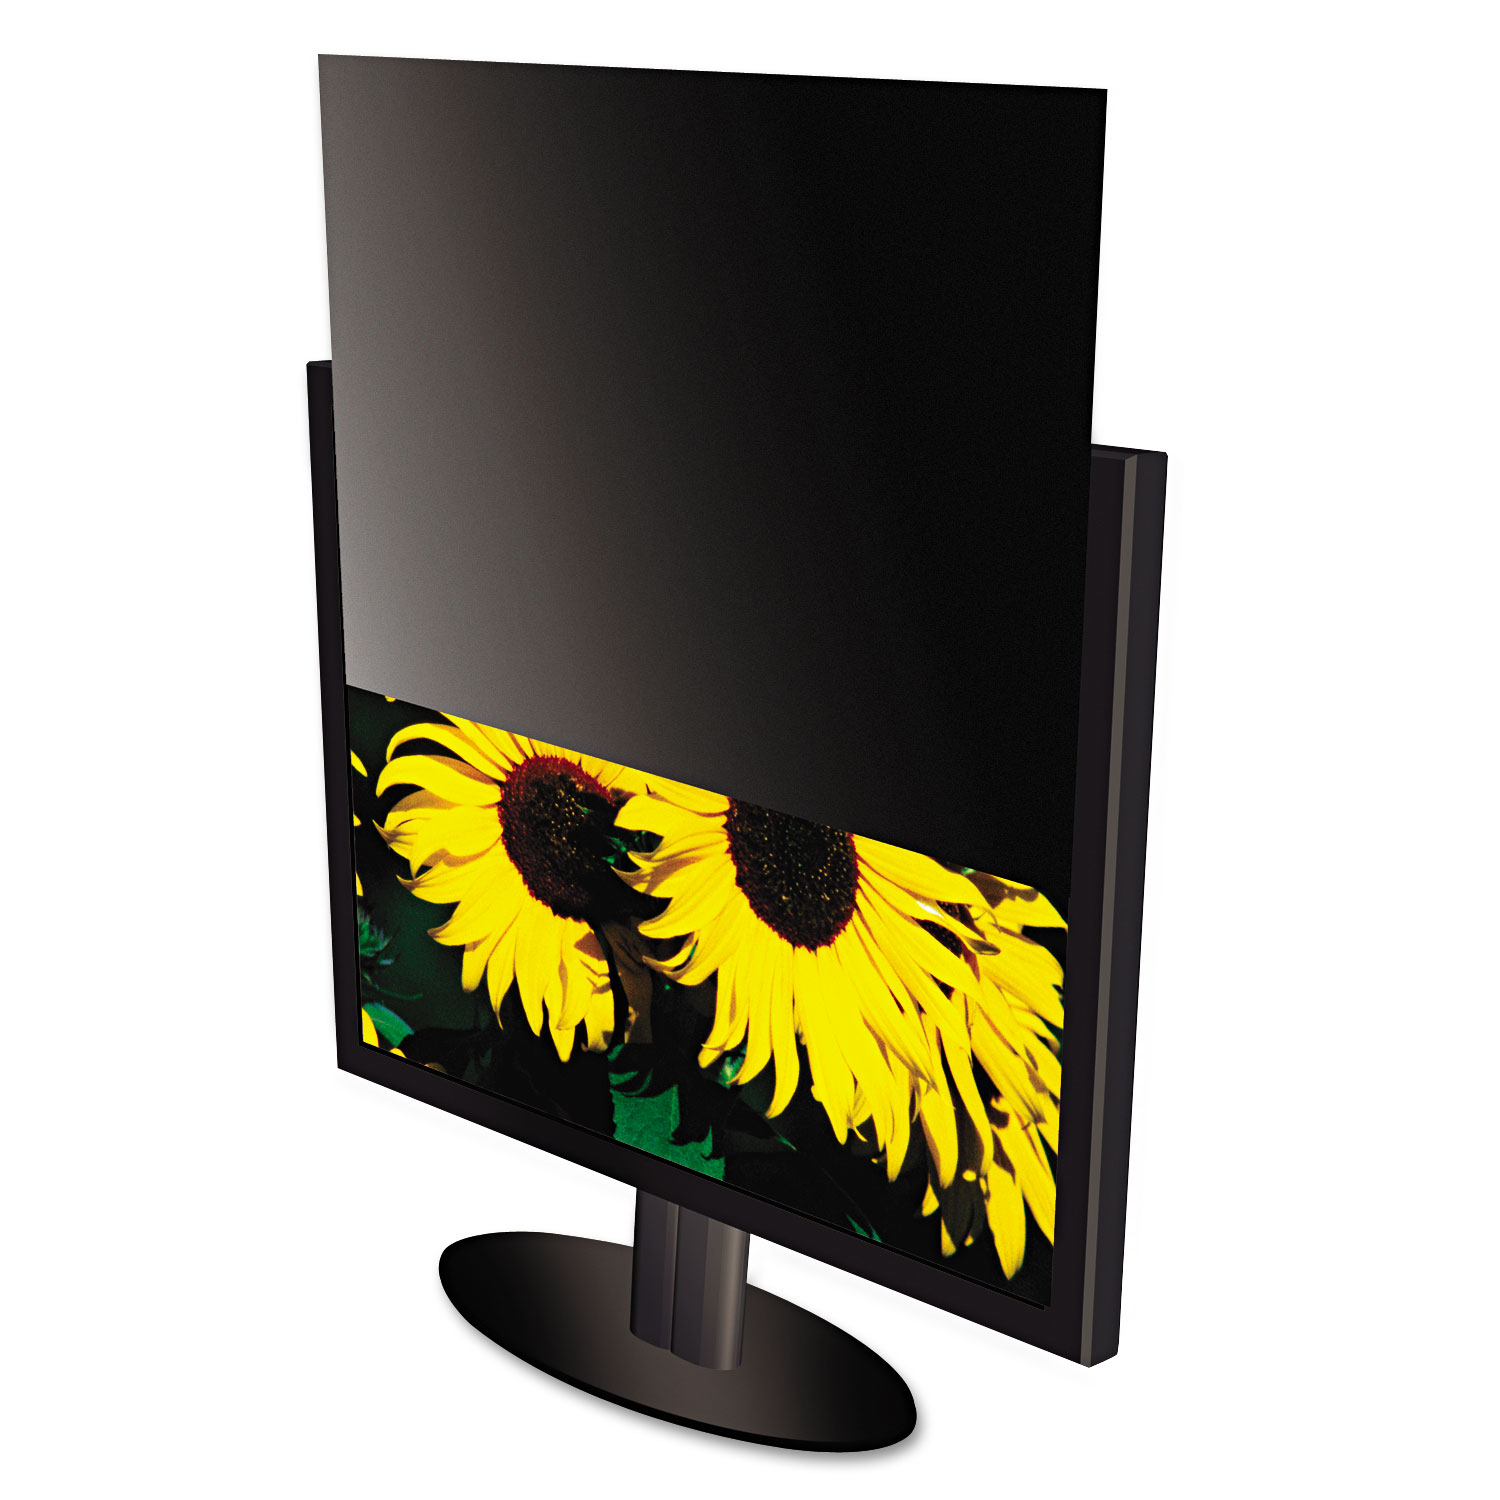  Kantek SVL17.0 Secure View Notebook LCD Privacy Filter, Fits 17 LCD Monitors (KTKSVL170) 